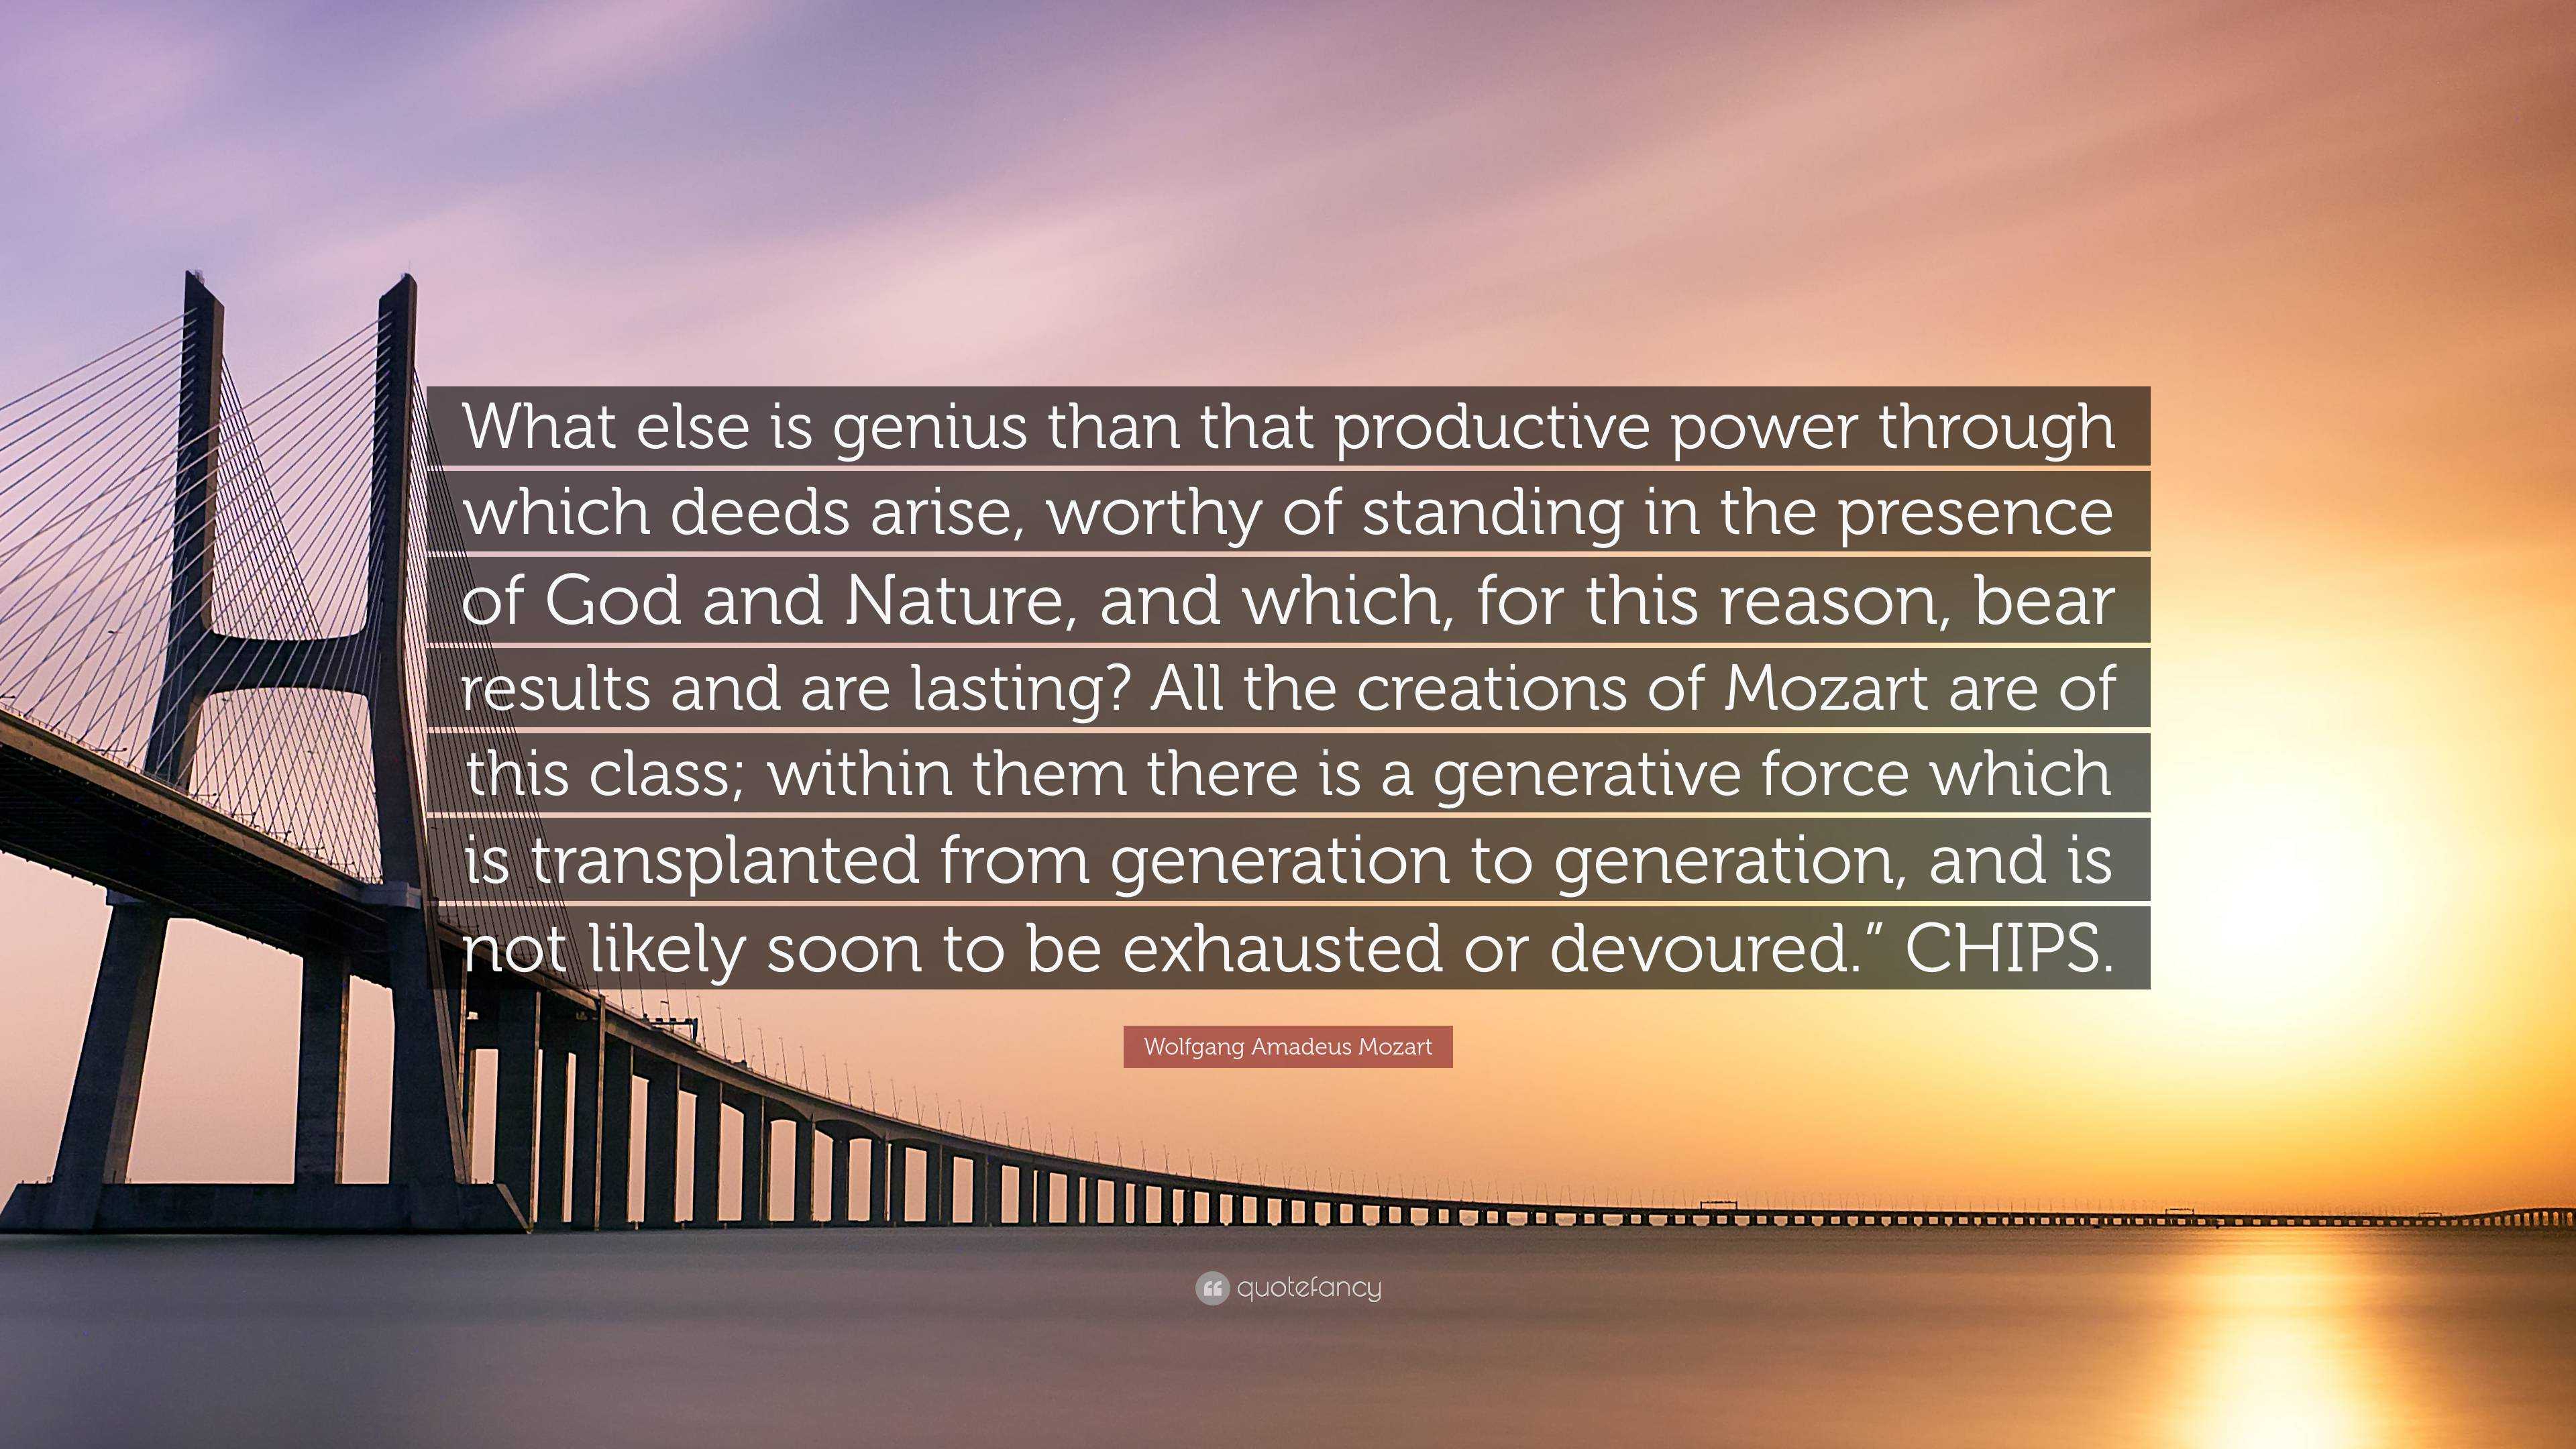 Wolfgang Amadeus Mozart Quote: “What else is genius than that ...